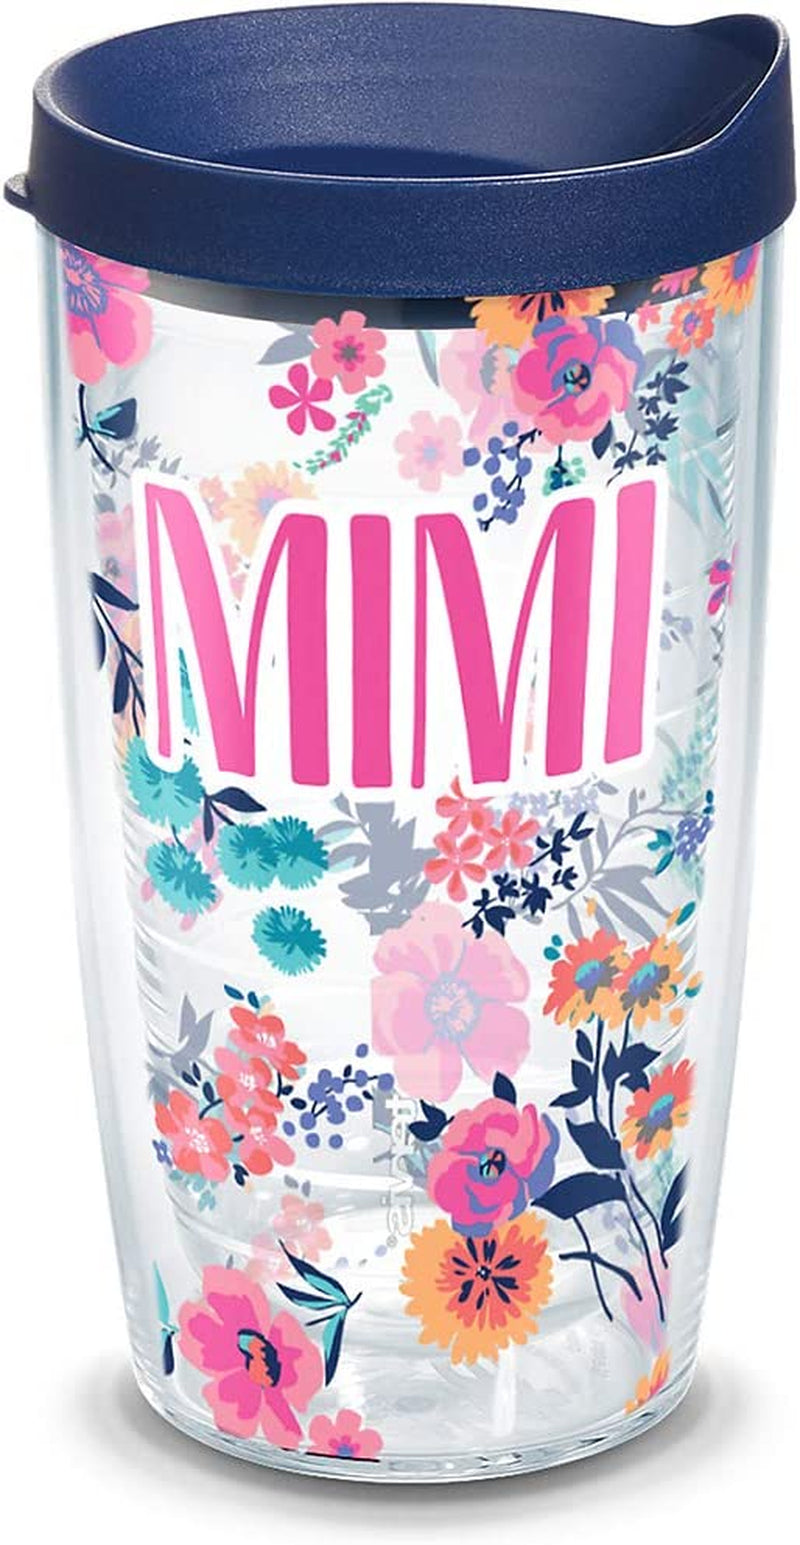 Tervis Made in USA Double Walled Dainty Floral Mother'S Day Insulated Tumbler Cup Keeps Drinks Cold & Hot, 16Oz, Gigi Home & Garden > Kitchen & Dining > Tableware > Drinkware Tervis Mimi 16oz 